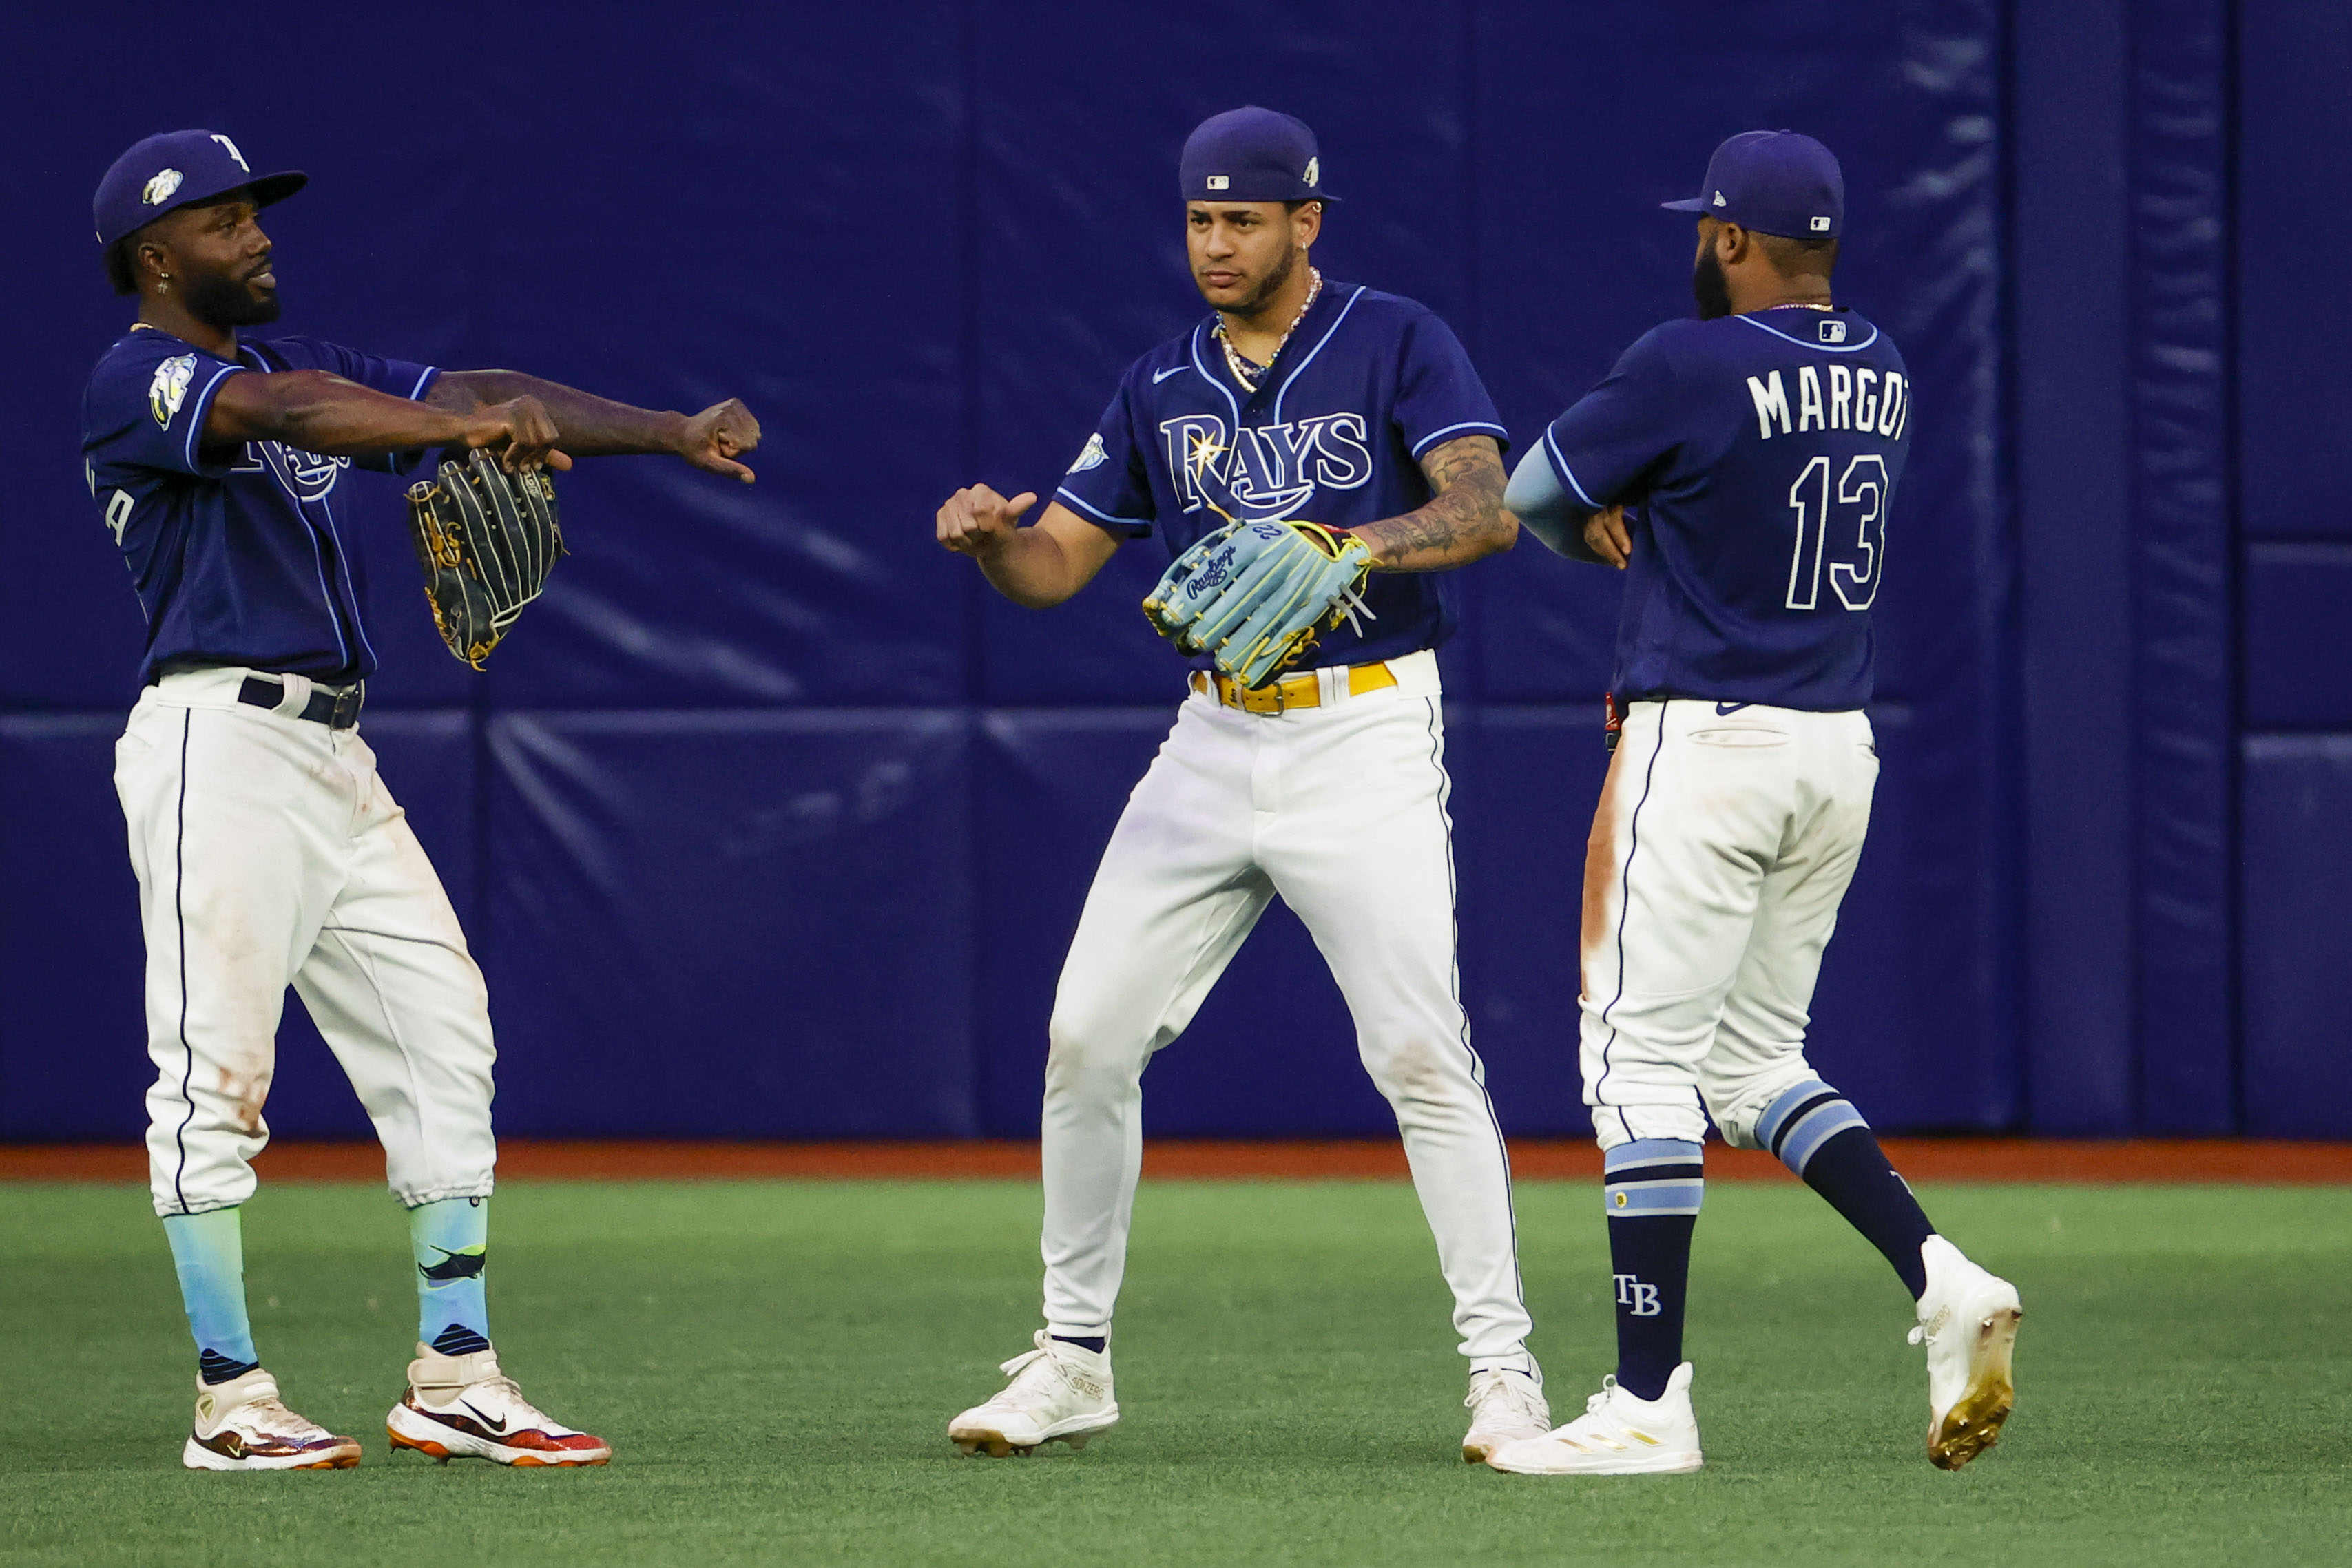 Superstitious or 'a little stitious,' Rays hope change does them good